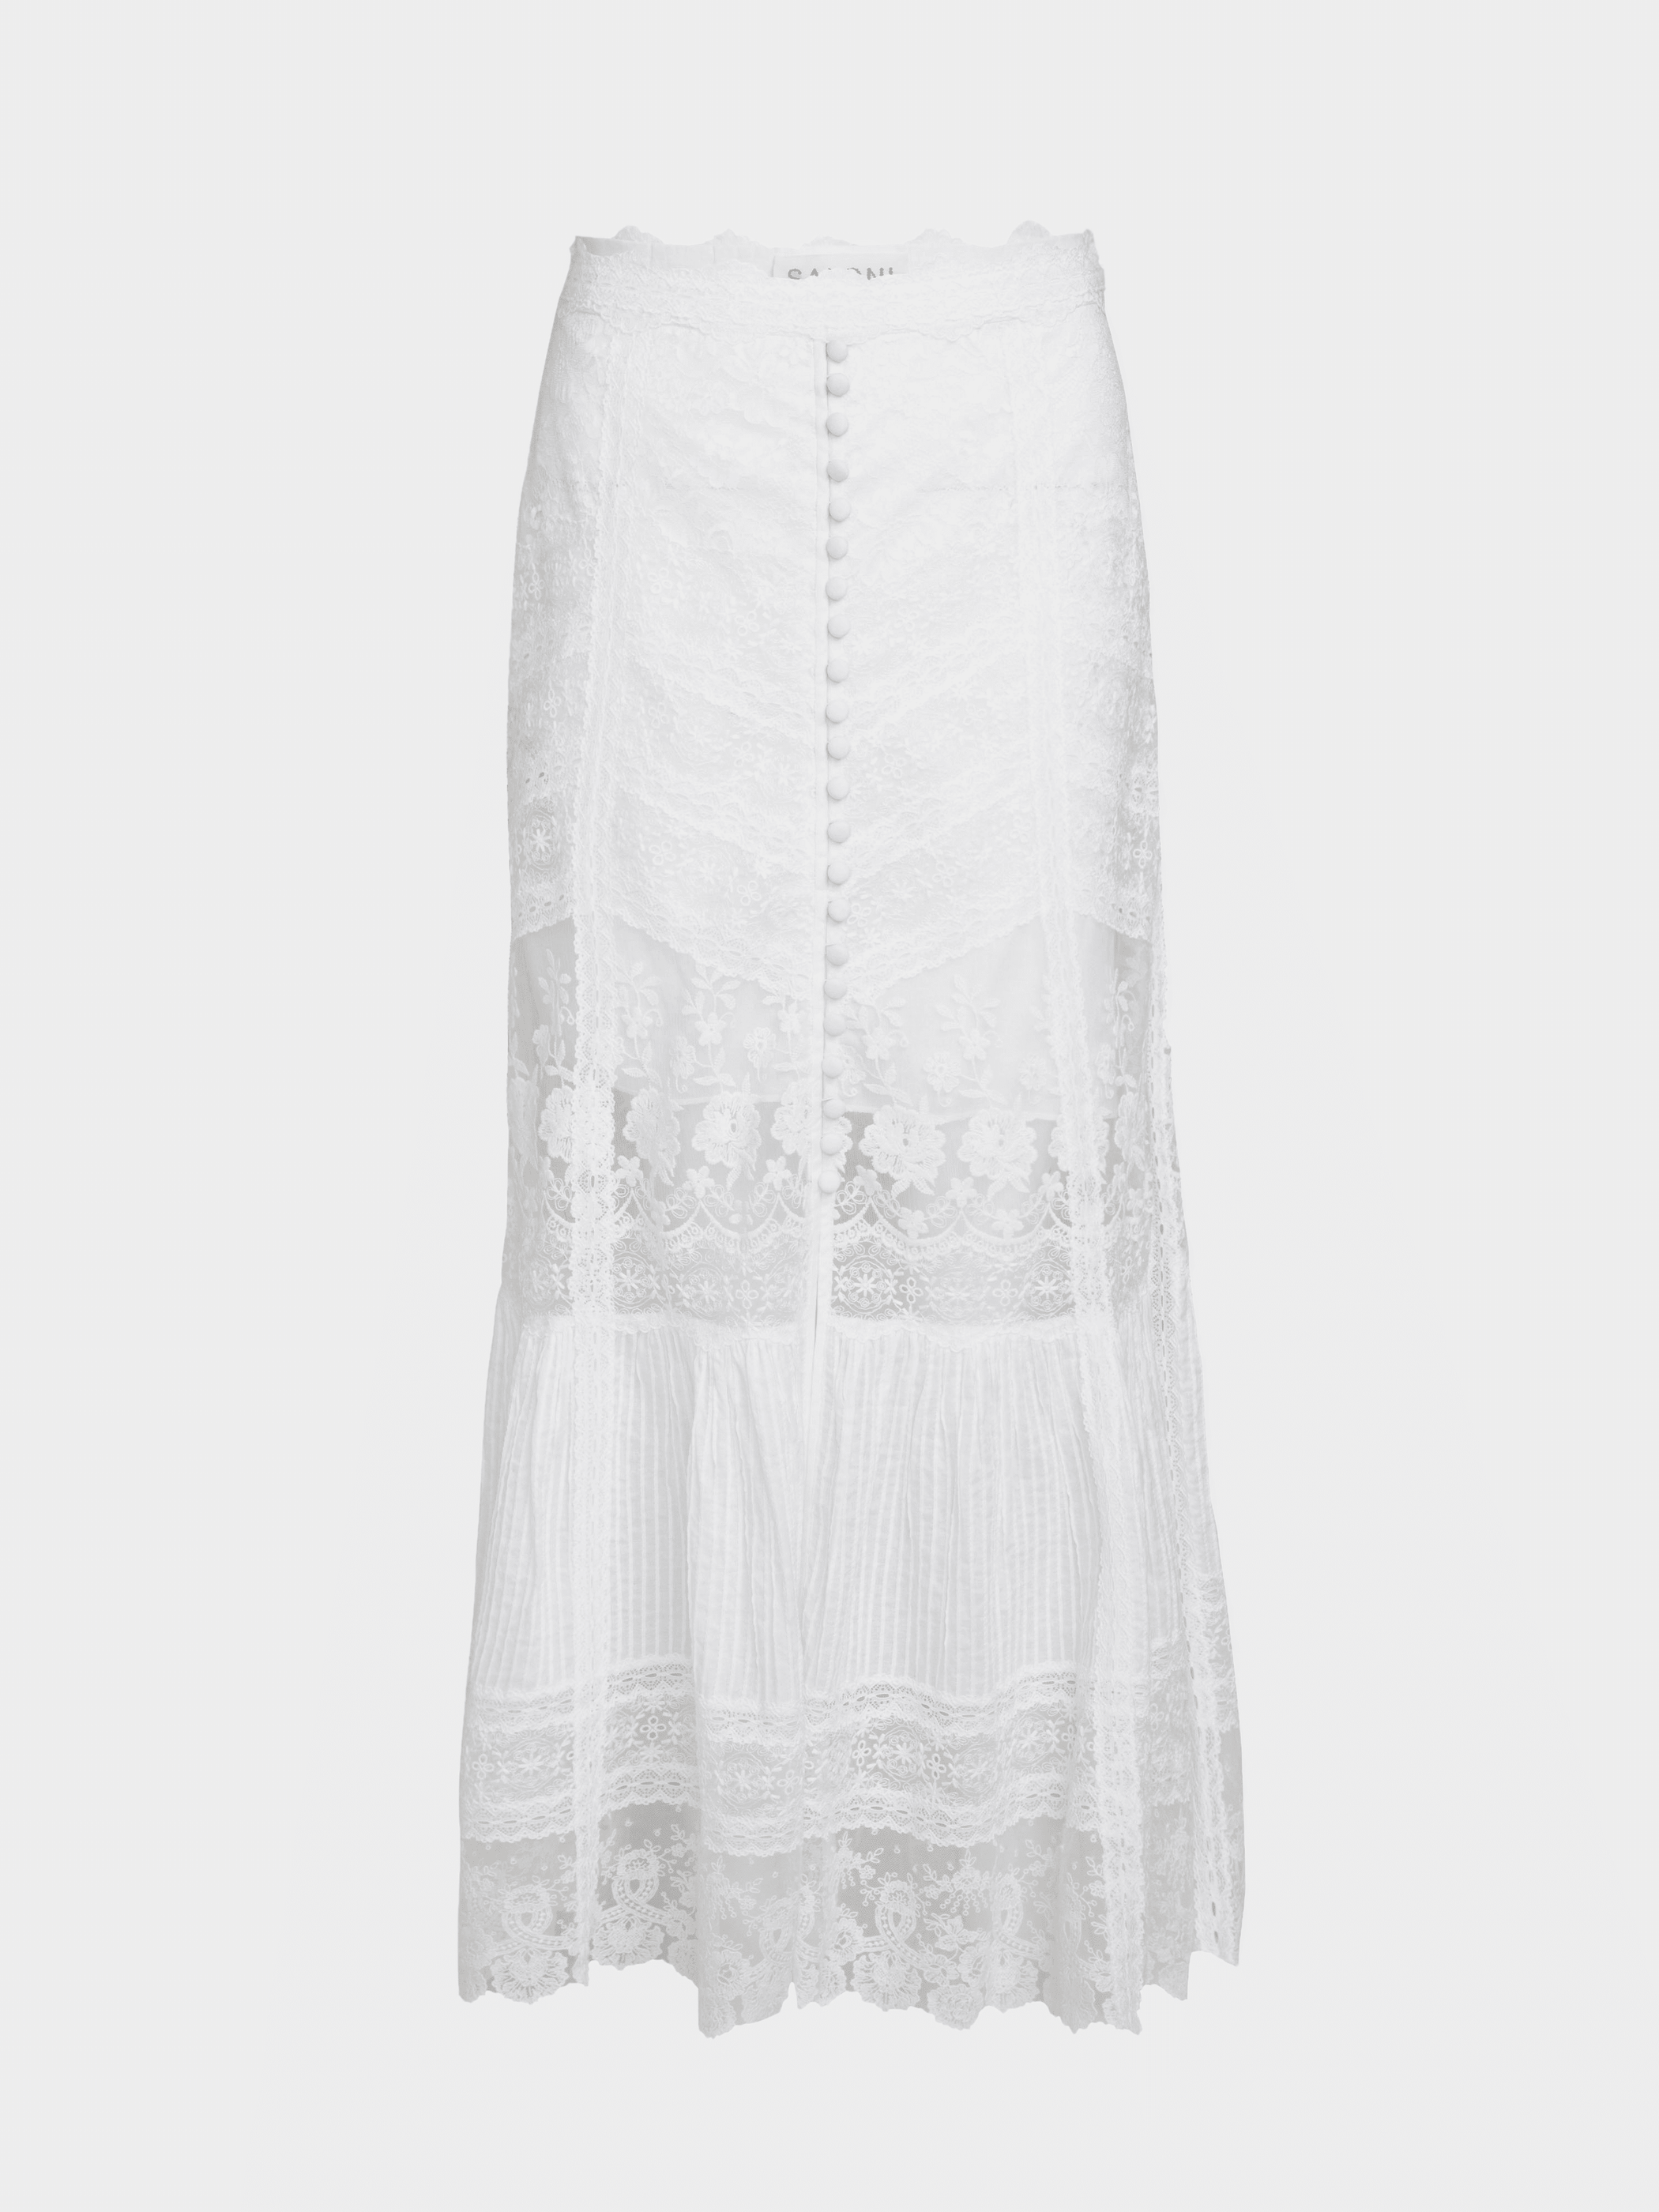 Lorna Lace Skirt in Ivory